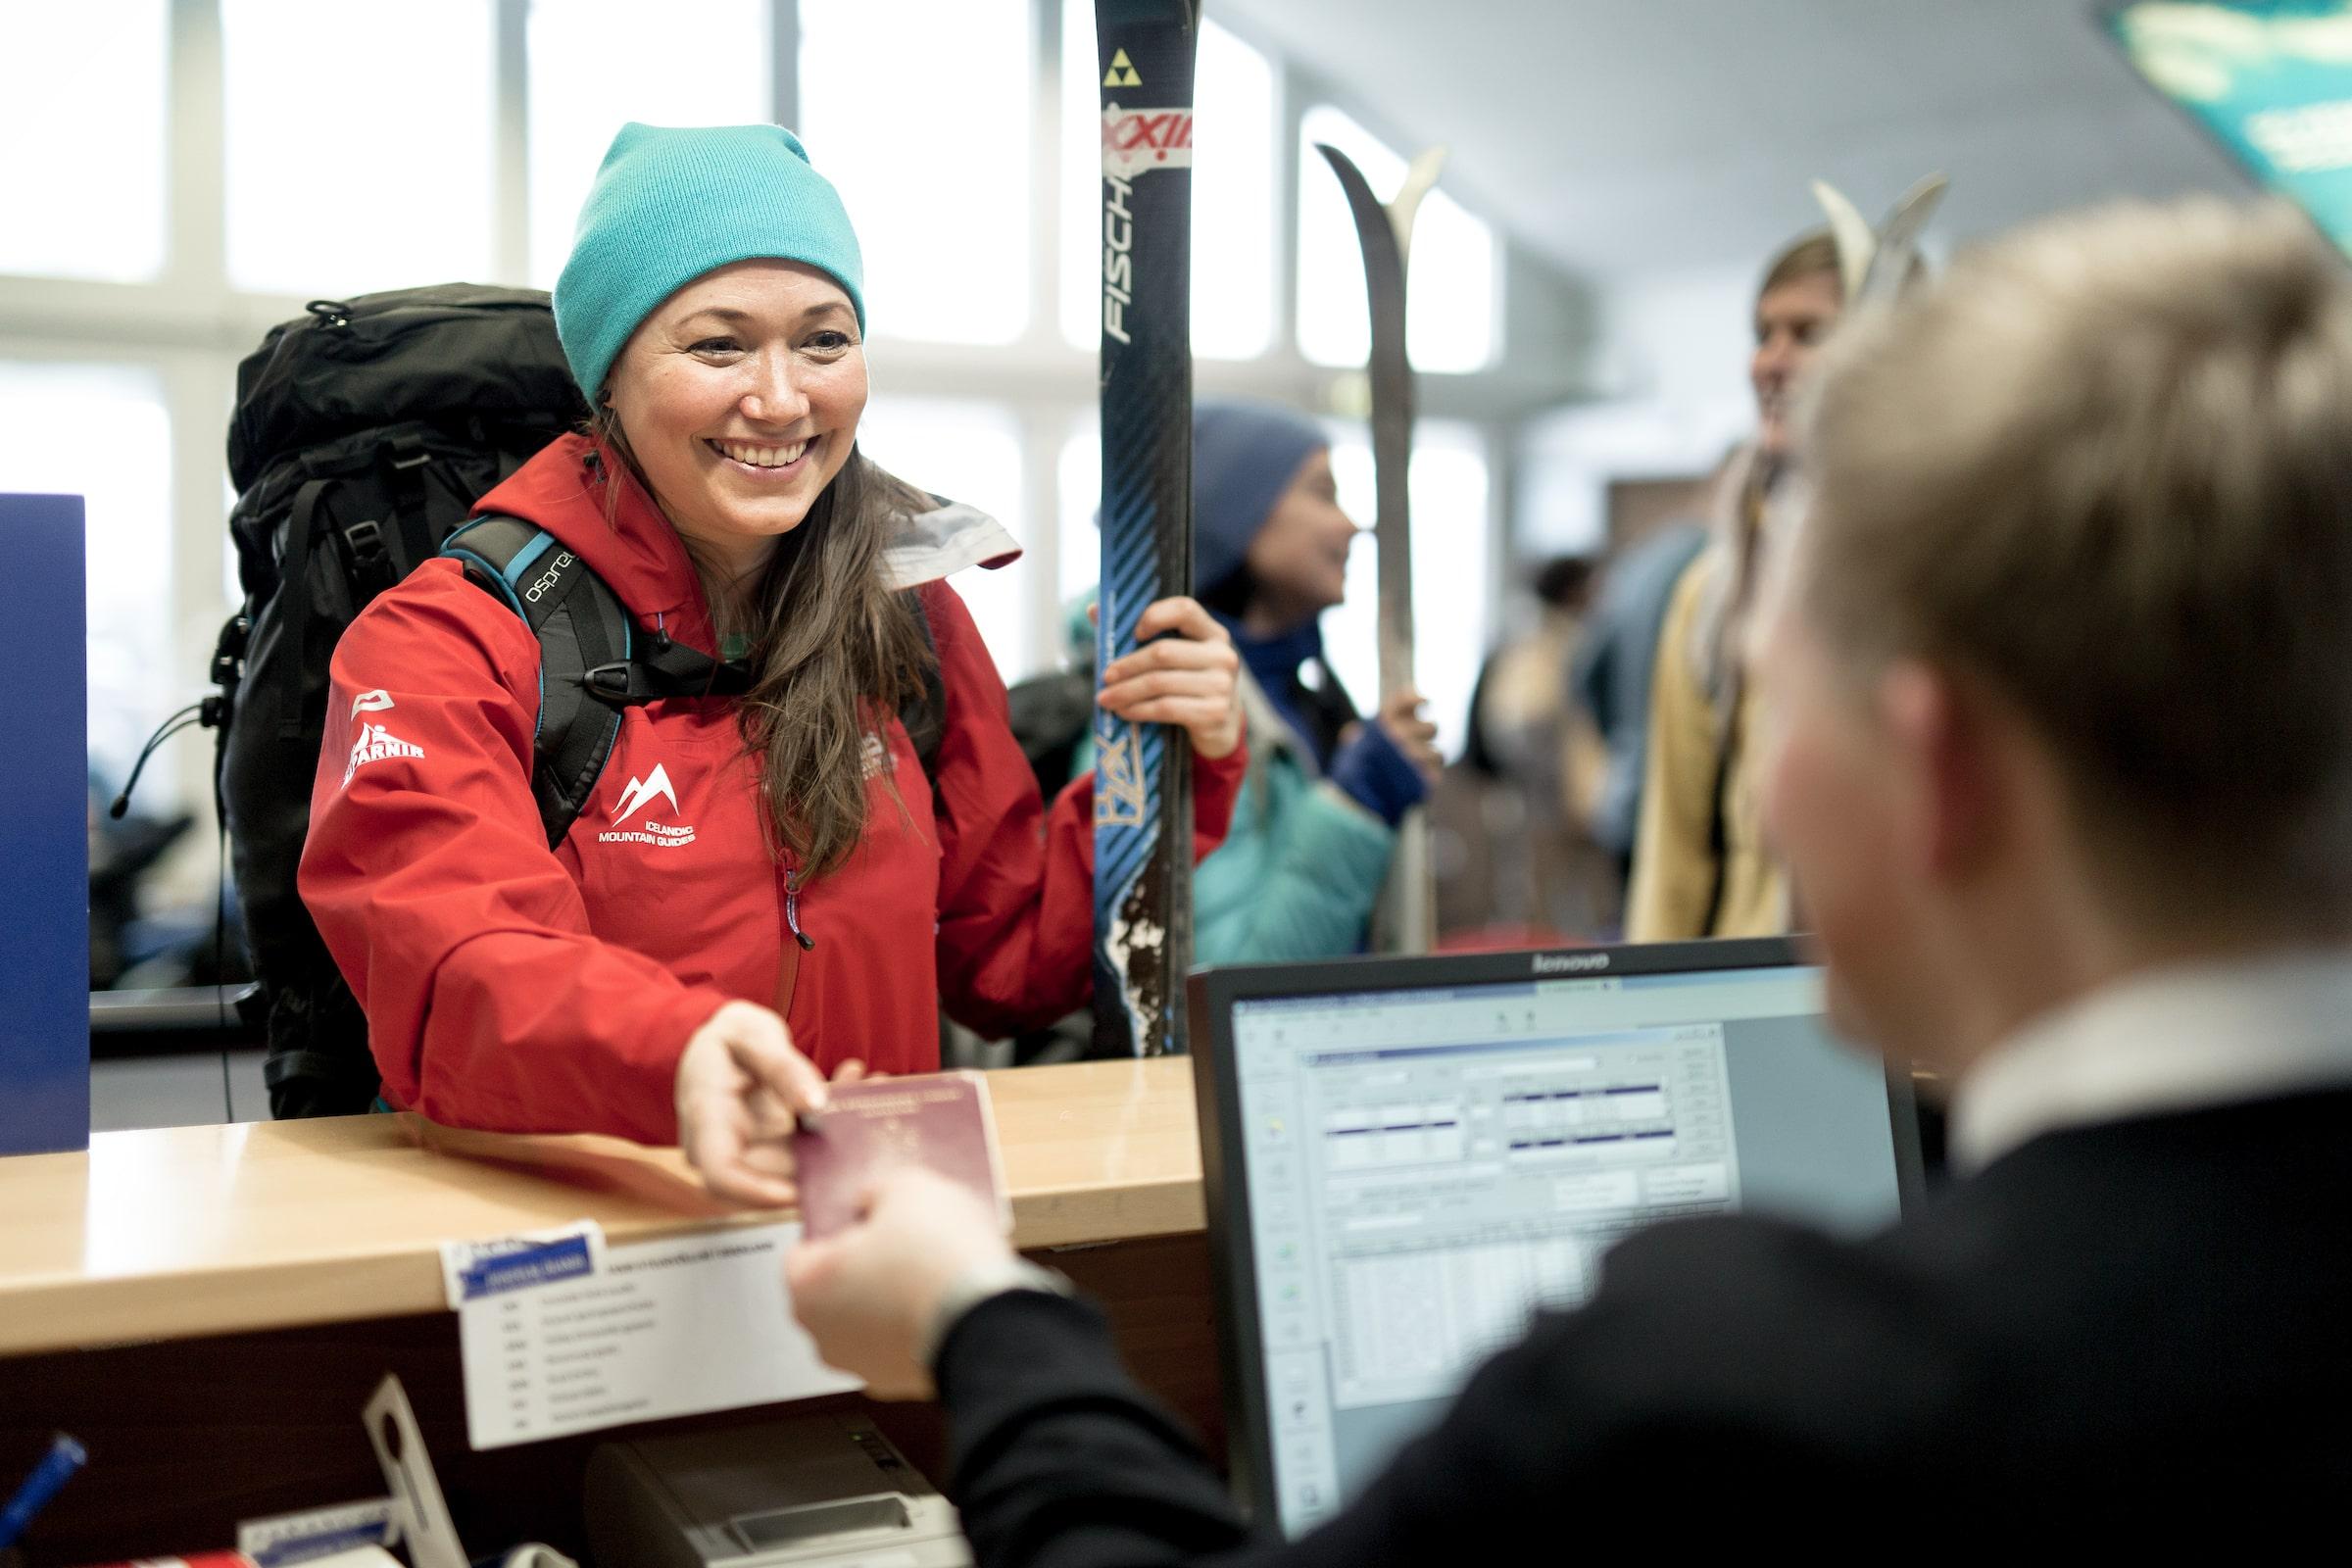 An Icelandic Mountain Guides ski guide checking in at Reykjavik Airport and going to East Greenland. Photo by Mads Pihl